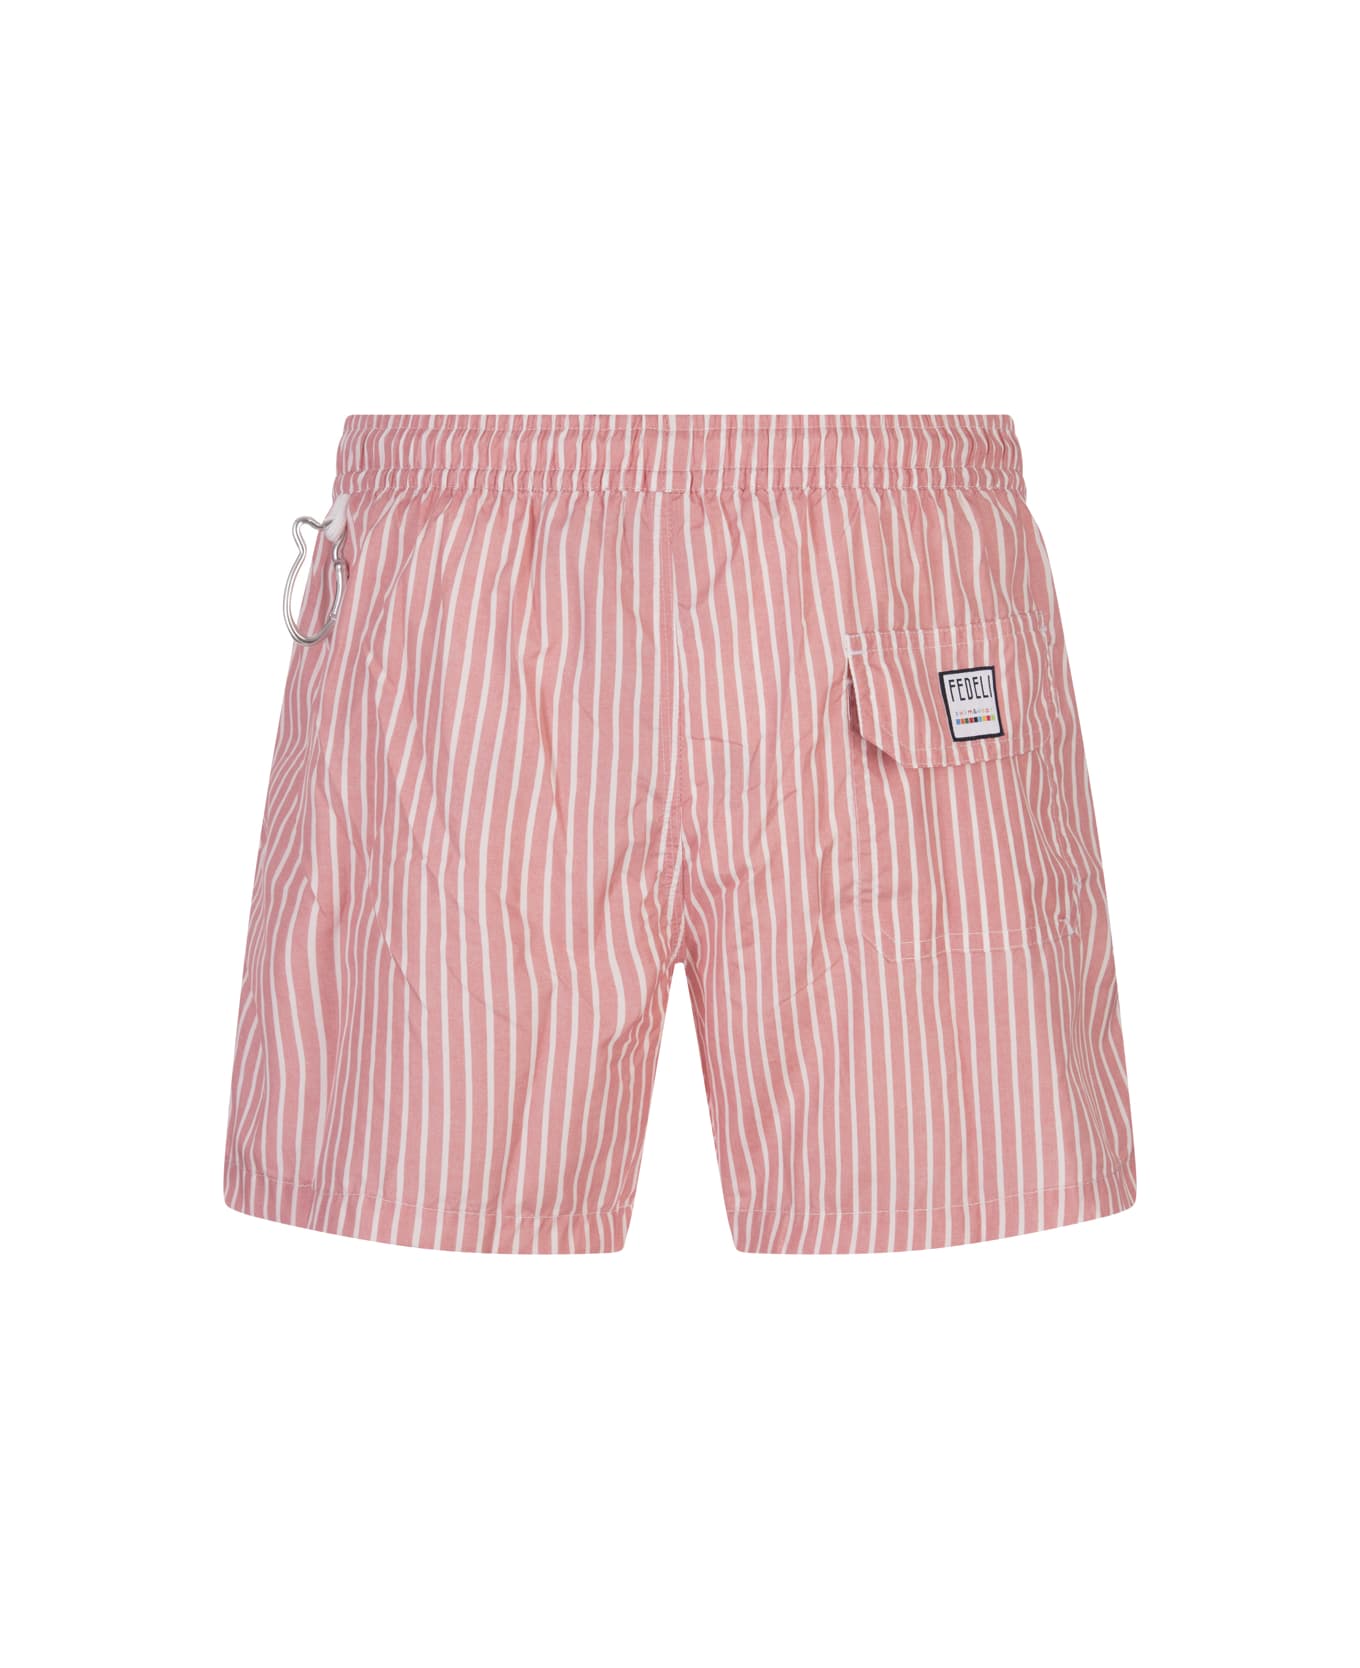 Fedeli Pink And White Striped Swim Shorts - Pink